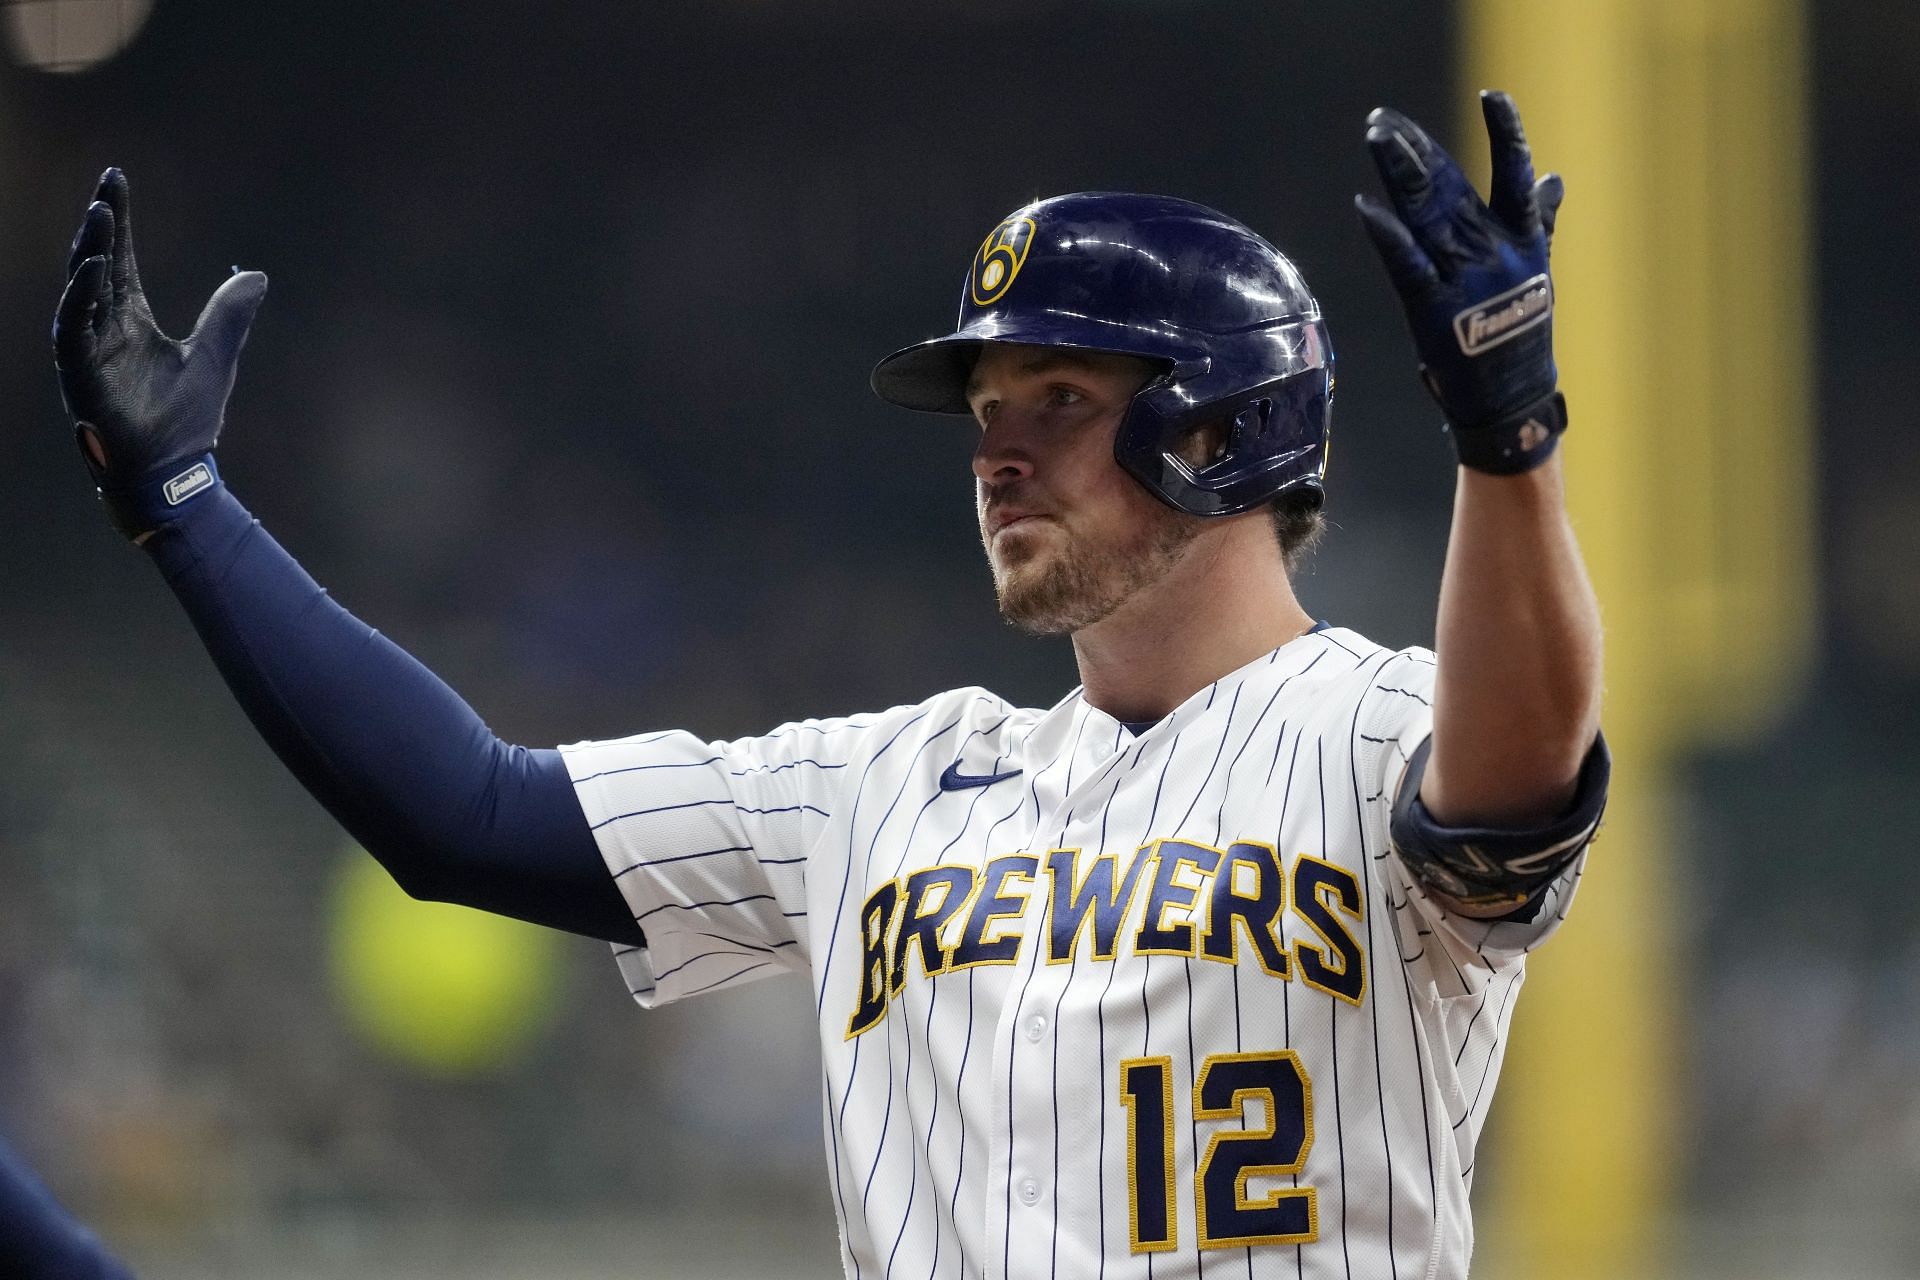 Hunter Renfroe - MLB Right field - News, Stats, Bio and more - The